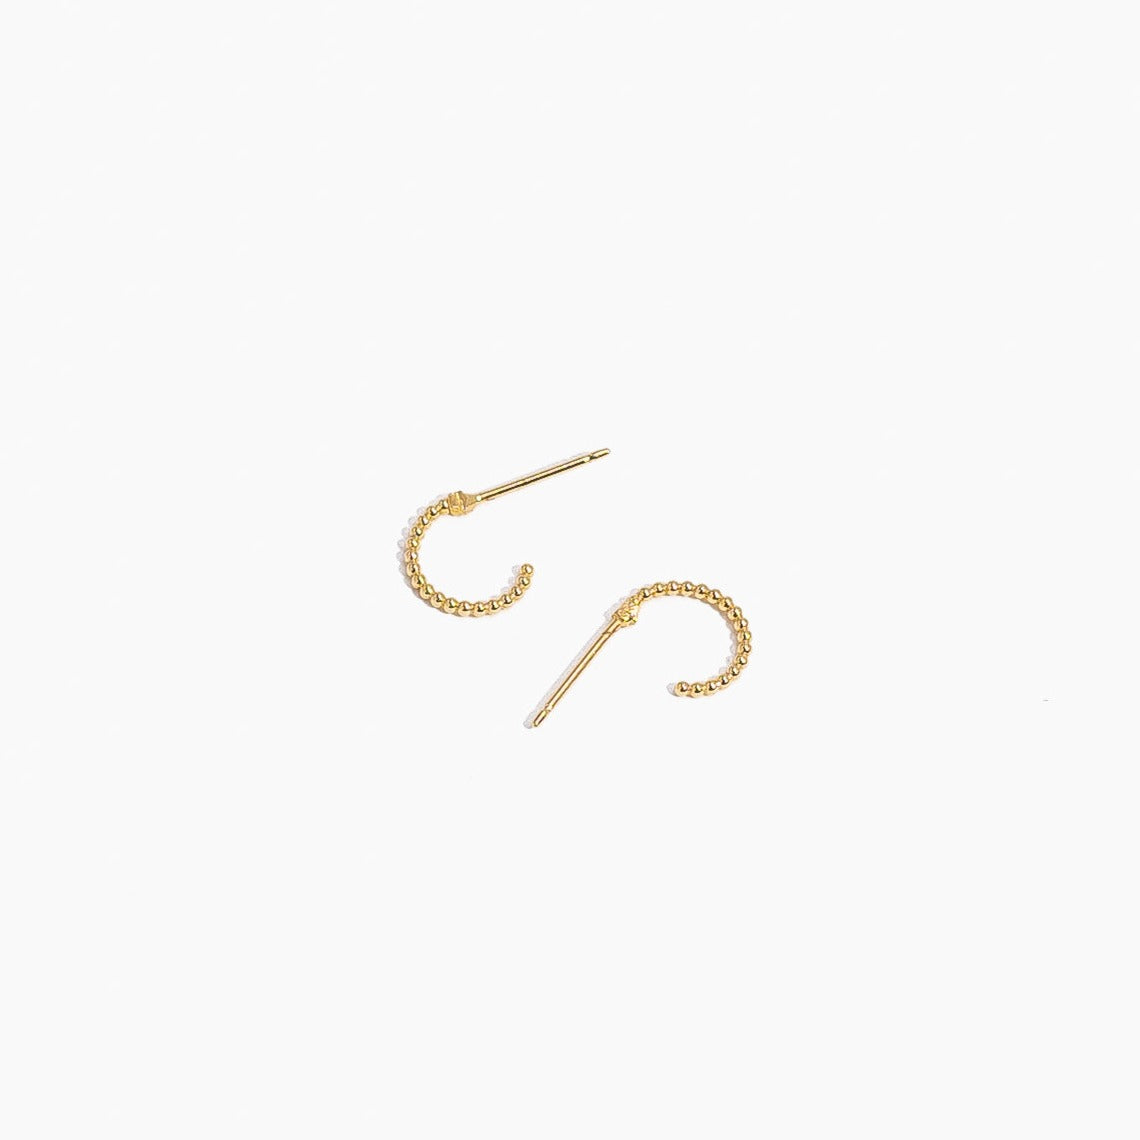 Beaded Hoop Studs, dainty hypoallergenic earrings perfect for the minimalist and made in America by Katie Dean Jewelry